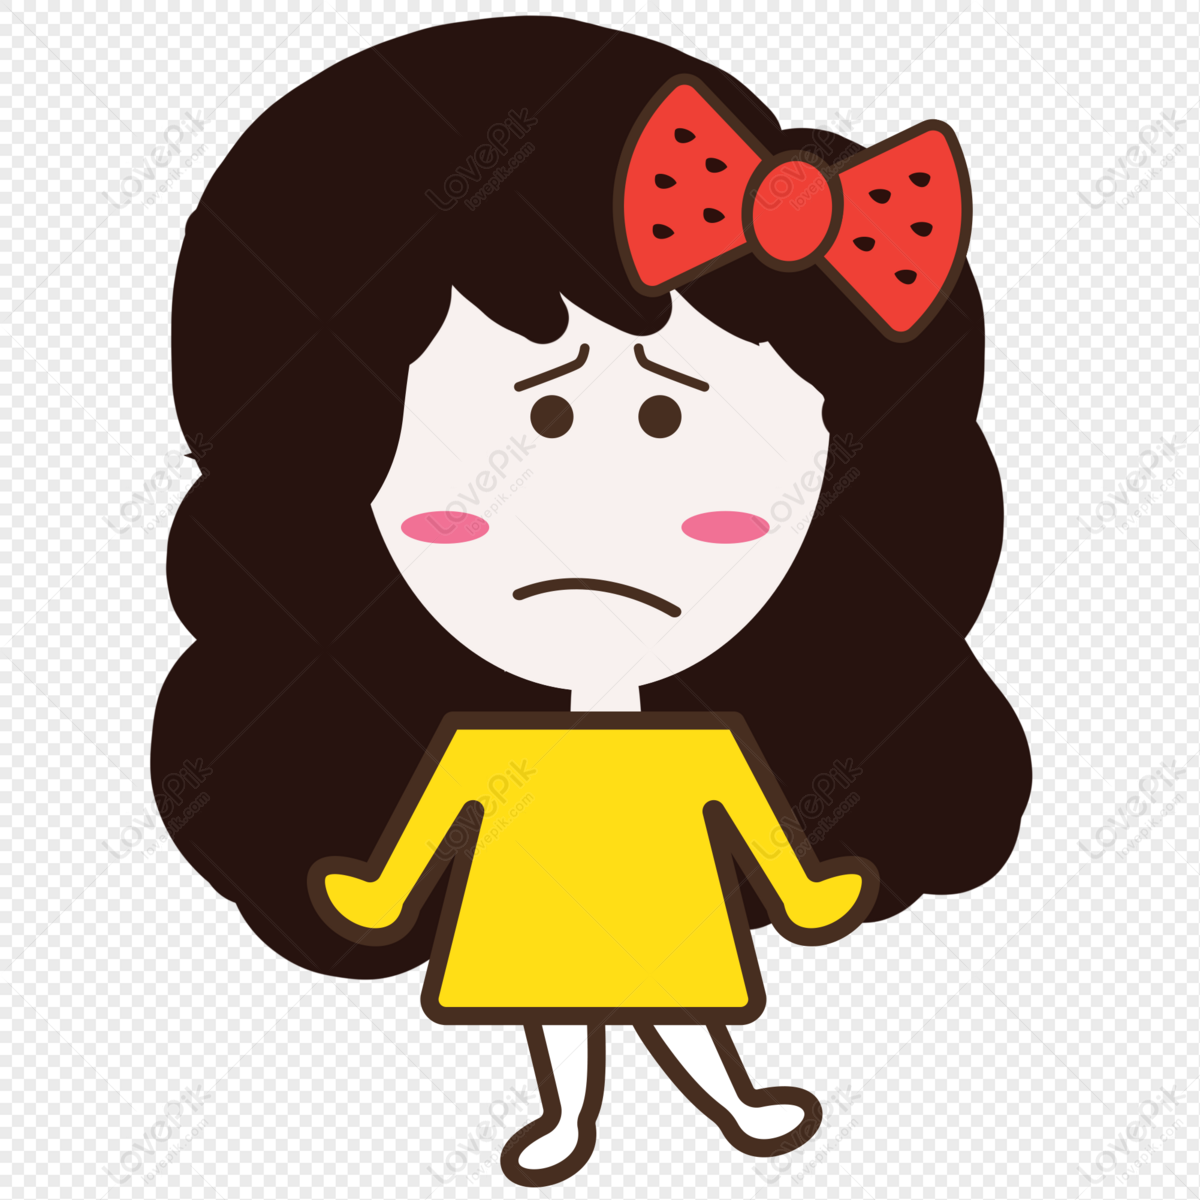 Cartoon Bow Girl Depressed Illustration PNG Transparent Image And Clipart  Image For Free Download - Lovepik | 401290237